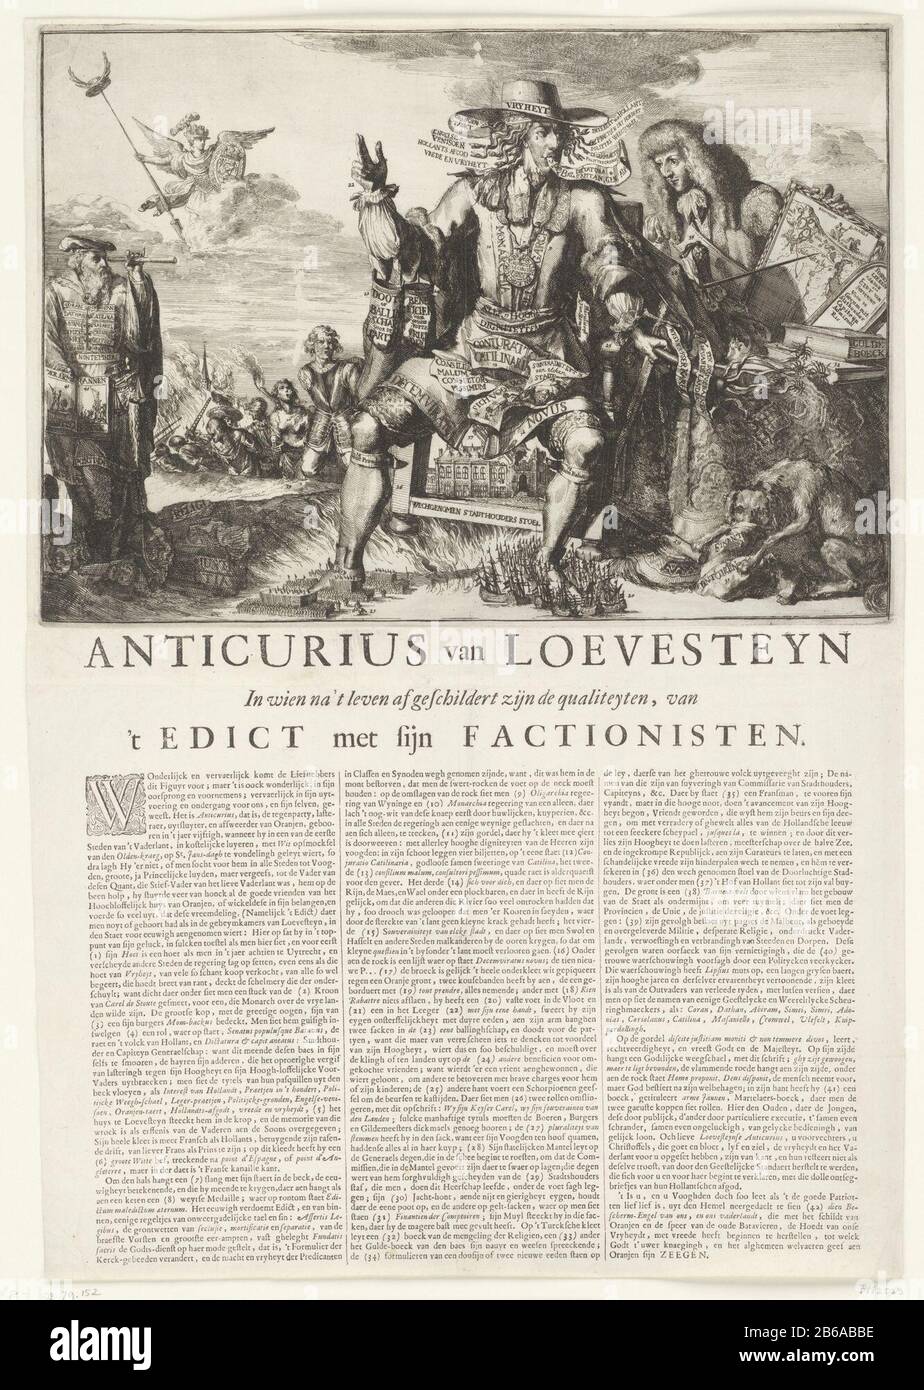 Allegory offered on erfstadhouderschap the Prince of Orange, 1674 Anticurius of Loevesteyn (title object) Anticurius of Loevesteyn. Allegory on the erfstadhouderschap offered to the Prince of Orange, 1674. The personification of the Loevesteinse faction sitting on the seat of the governor coated with patriotische leaflets of the party of the brothers De Witt. At his feet war at sea and on land. Behind the chair is the French King Louis XIV with a map of Holland. To the left is the personification of Where: Warning with binoculars in hand a book depicting the murder of the brothers de Witt. Und Stock Photo